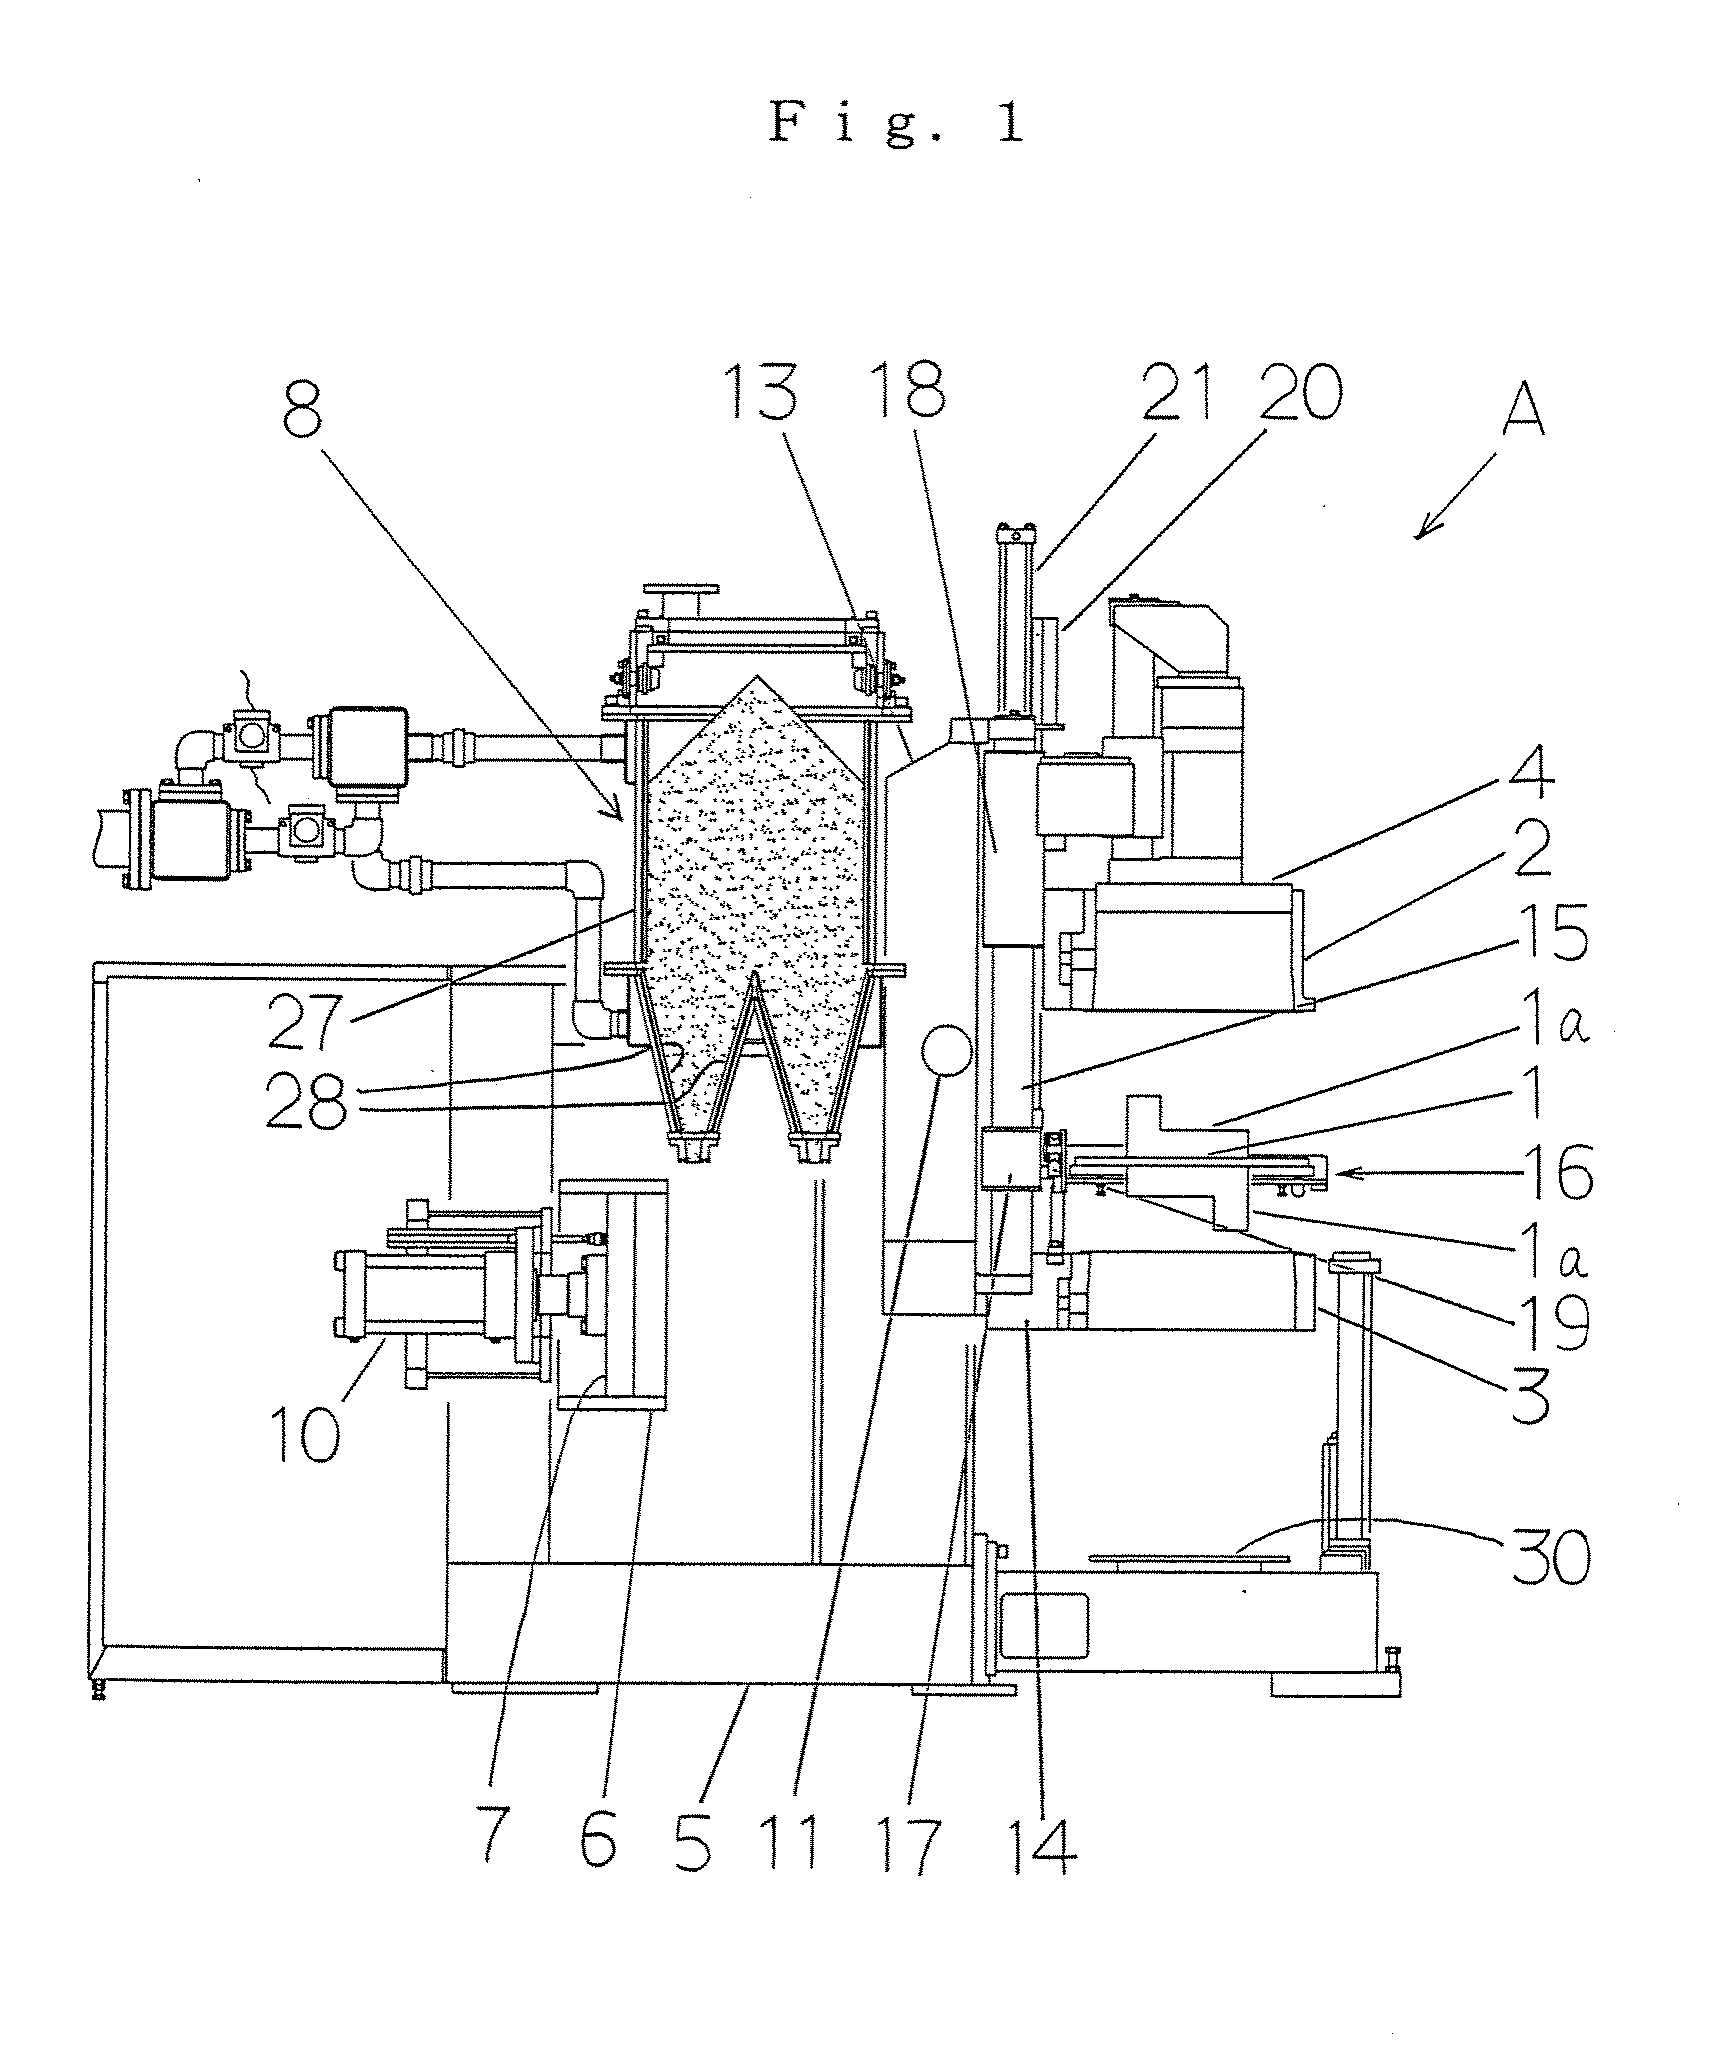 A core-setting apparatus used for a molding apparatus and a method for setting a core